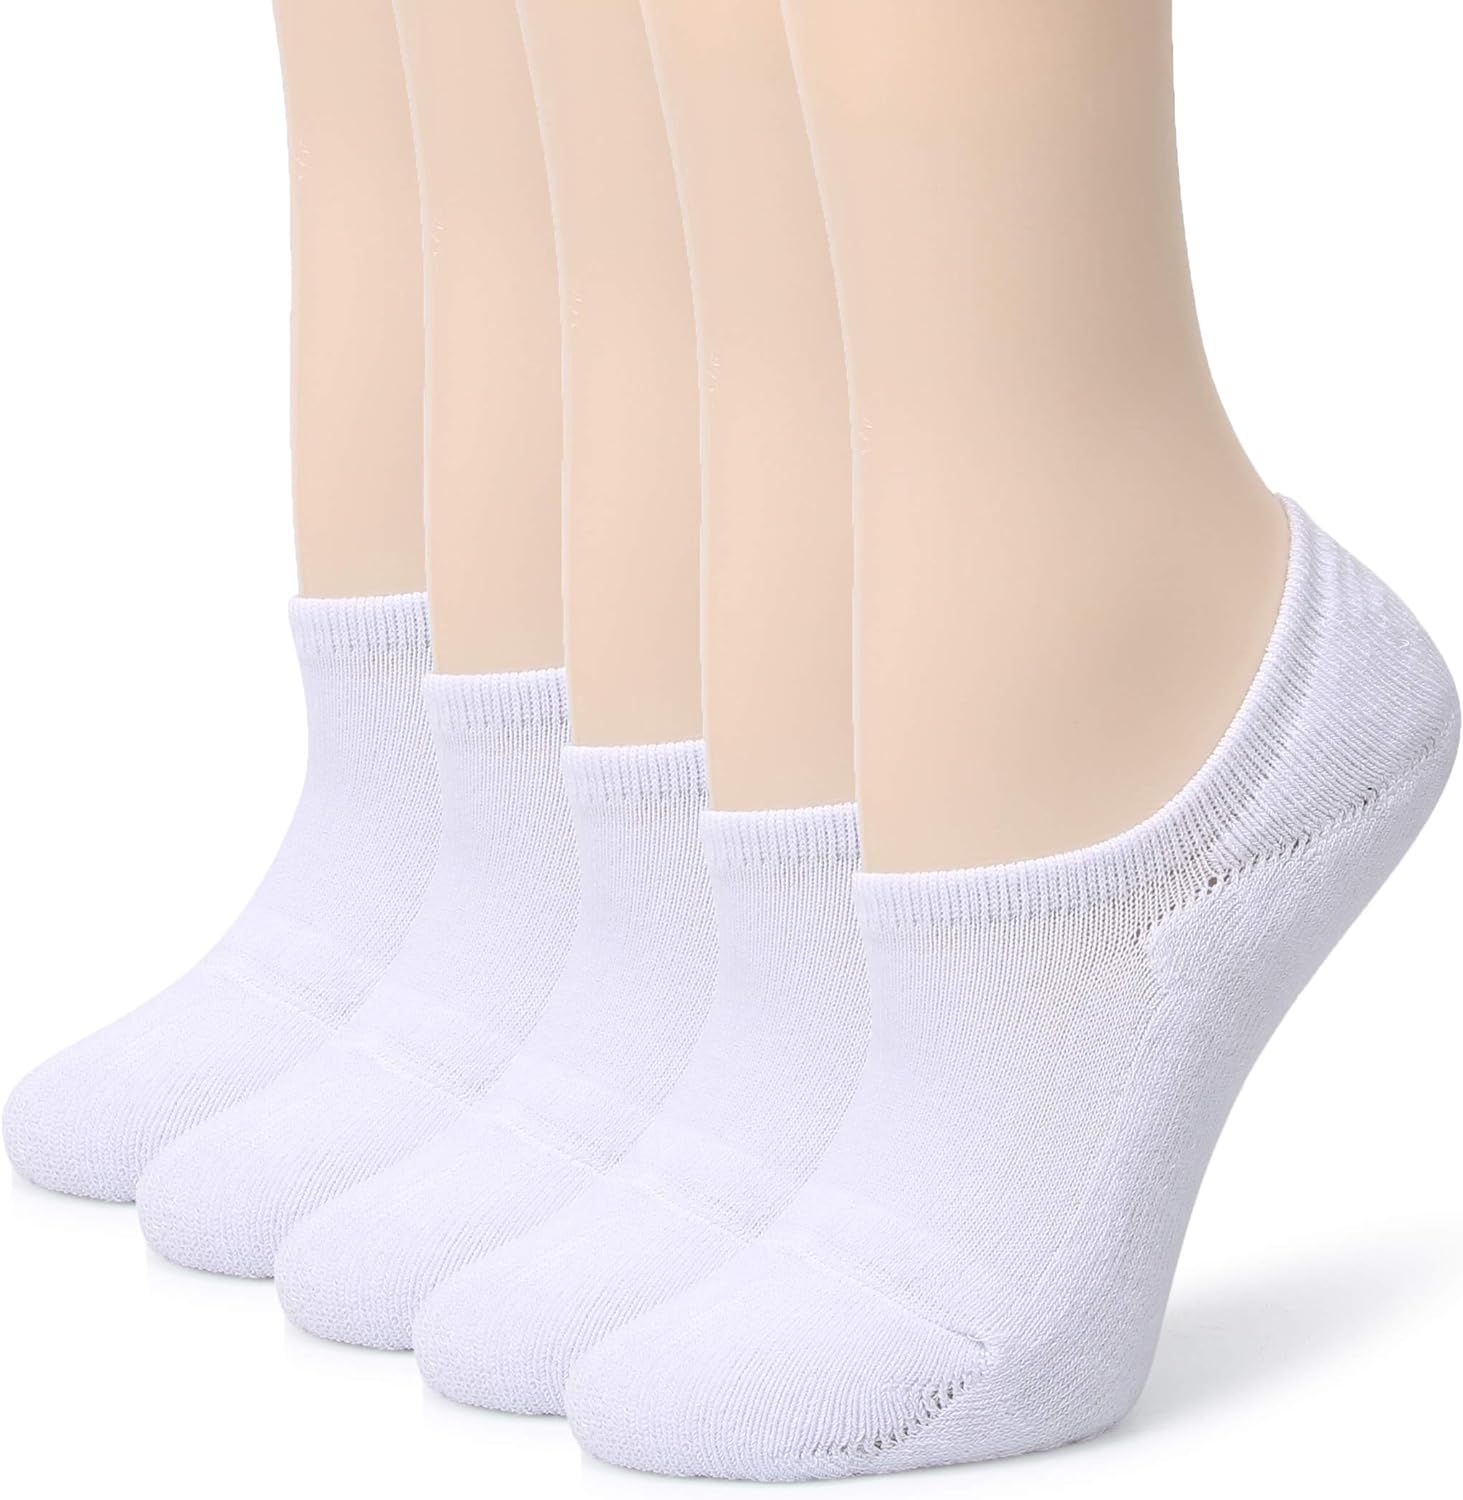 Leotruny Women's Cushion Sweat-absorbent Breathable Soft Athletic No Show Socks | Amazon (US)